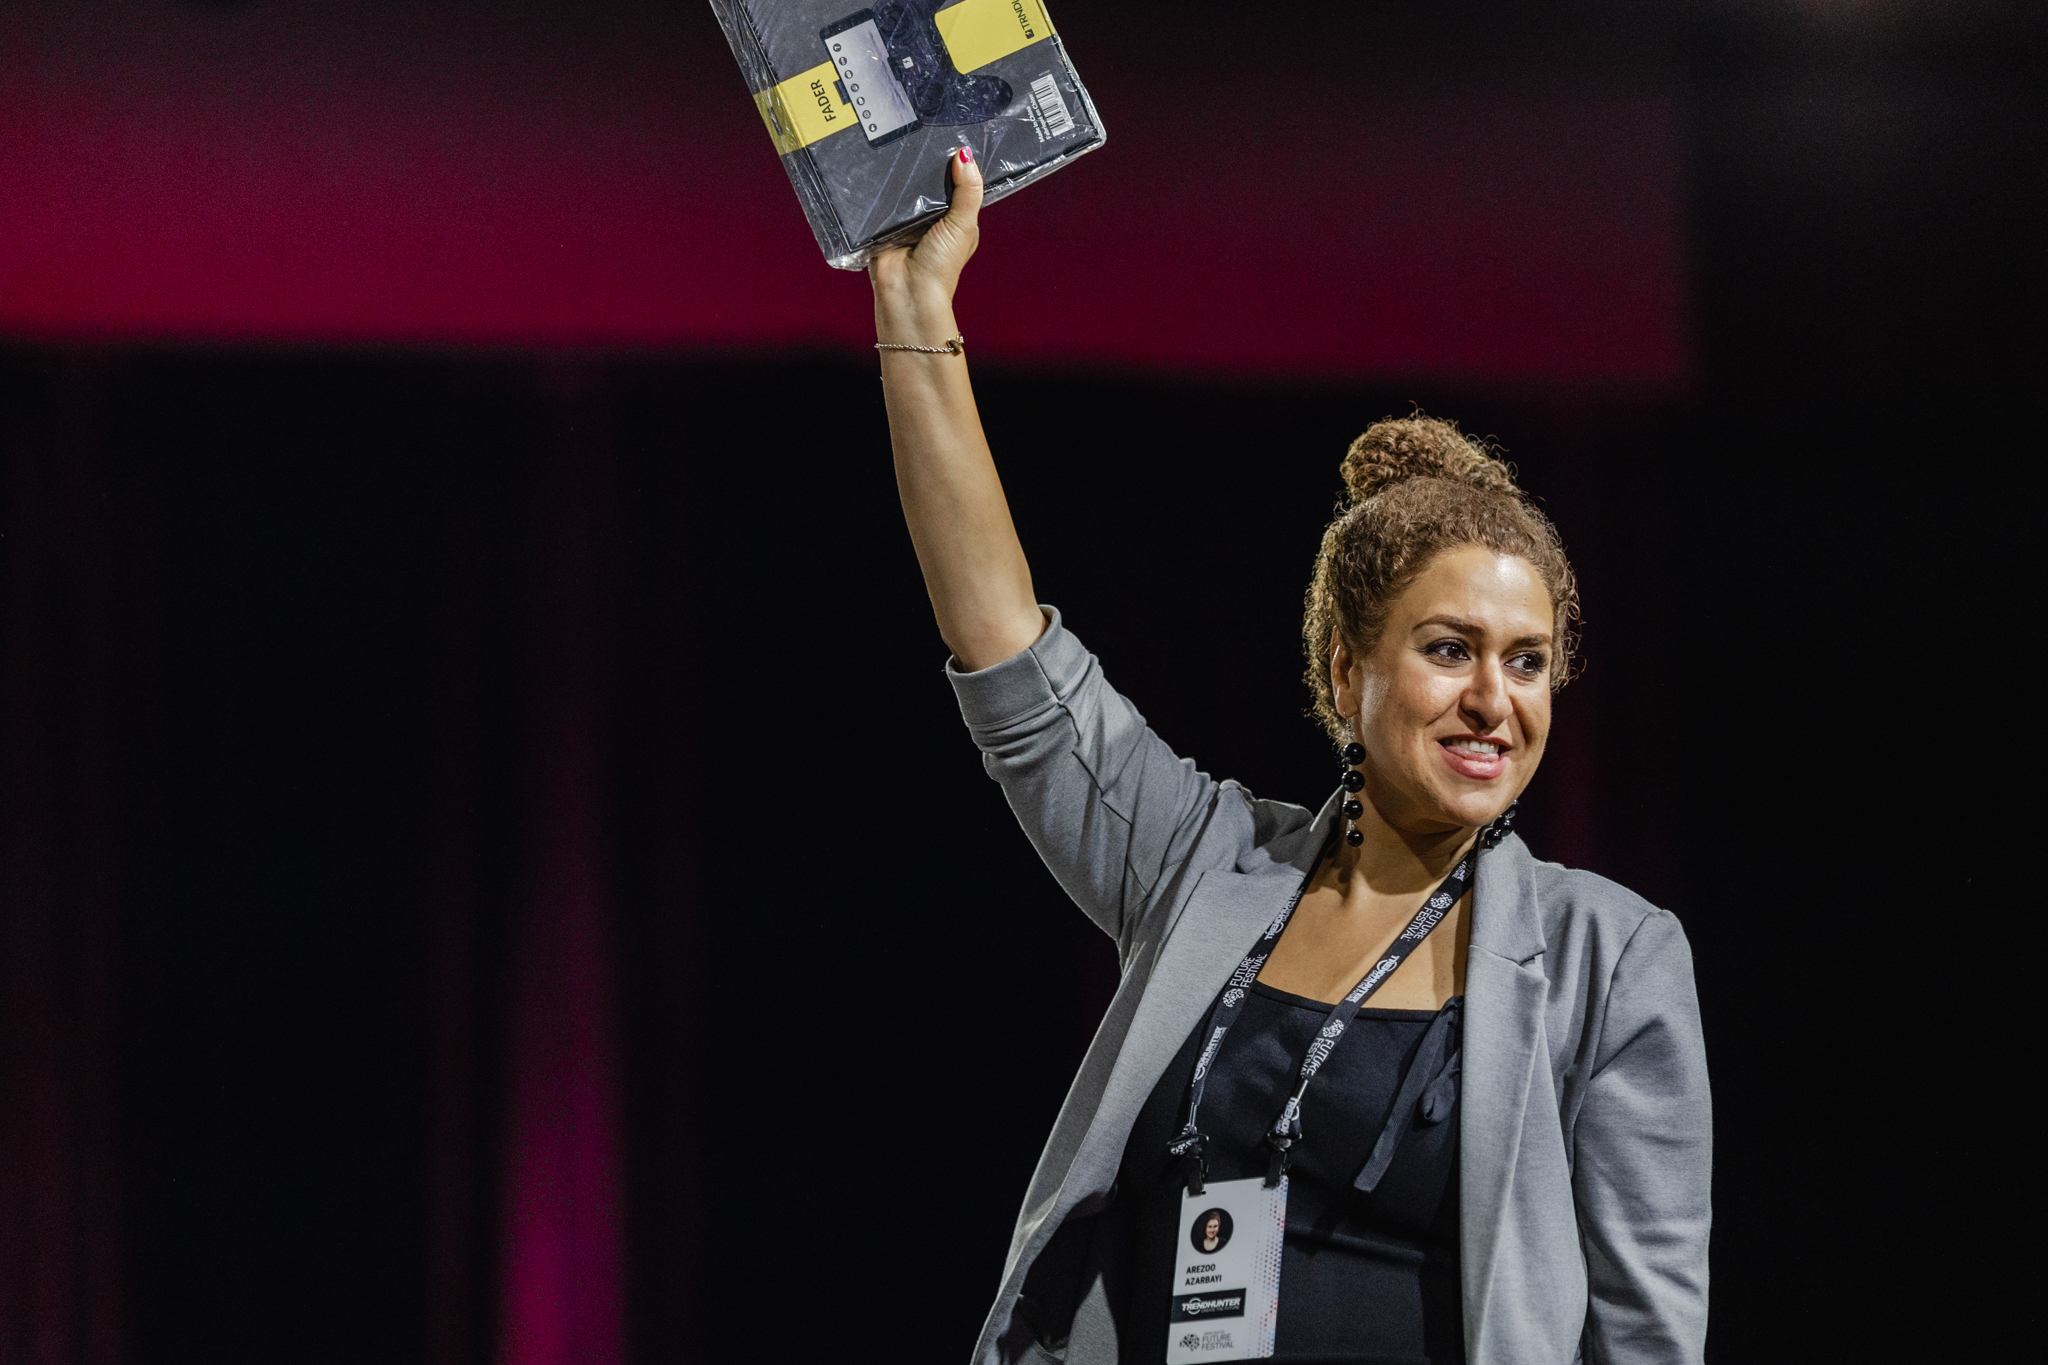 An event photographer captures a woman confidently holding up a book on stage.